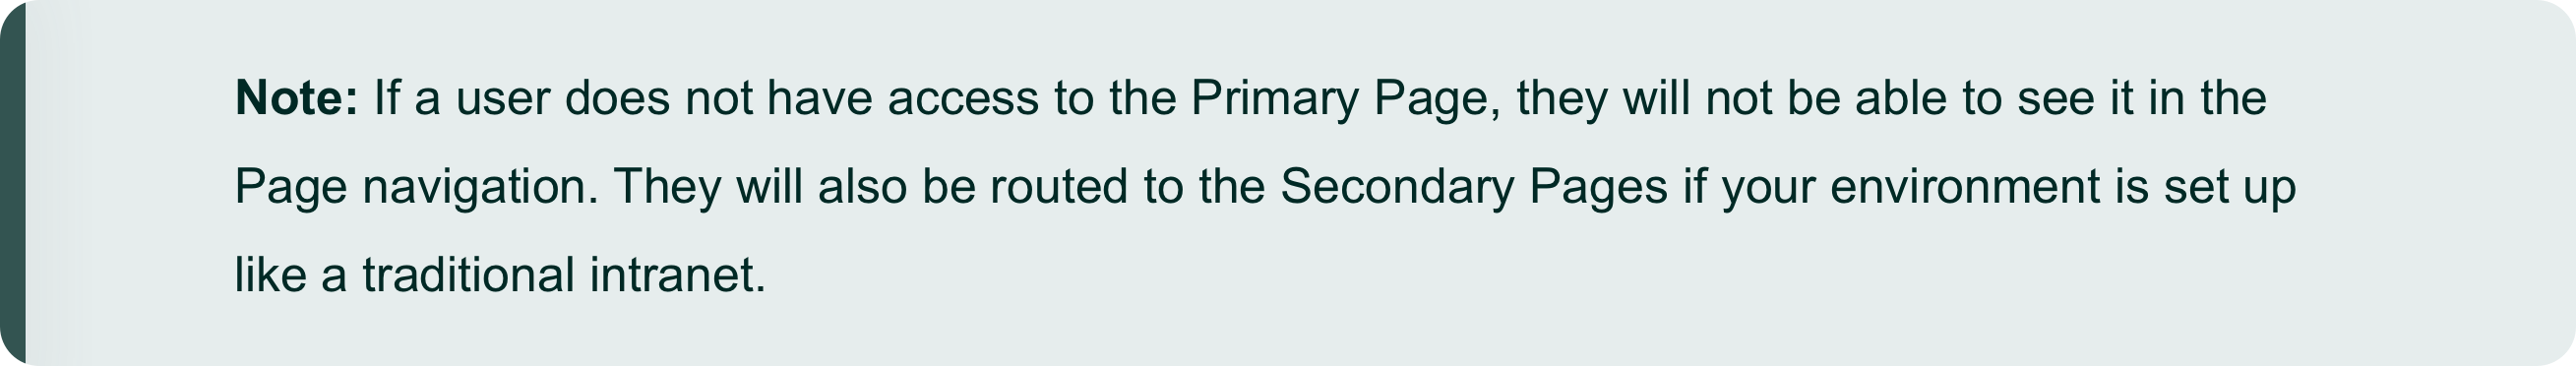 Primary_and_Secondary_Pages_1.png